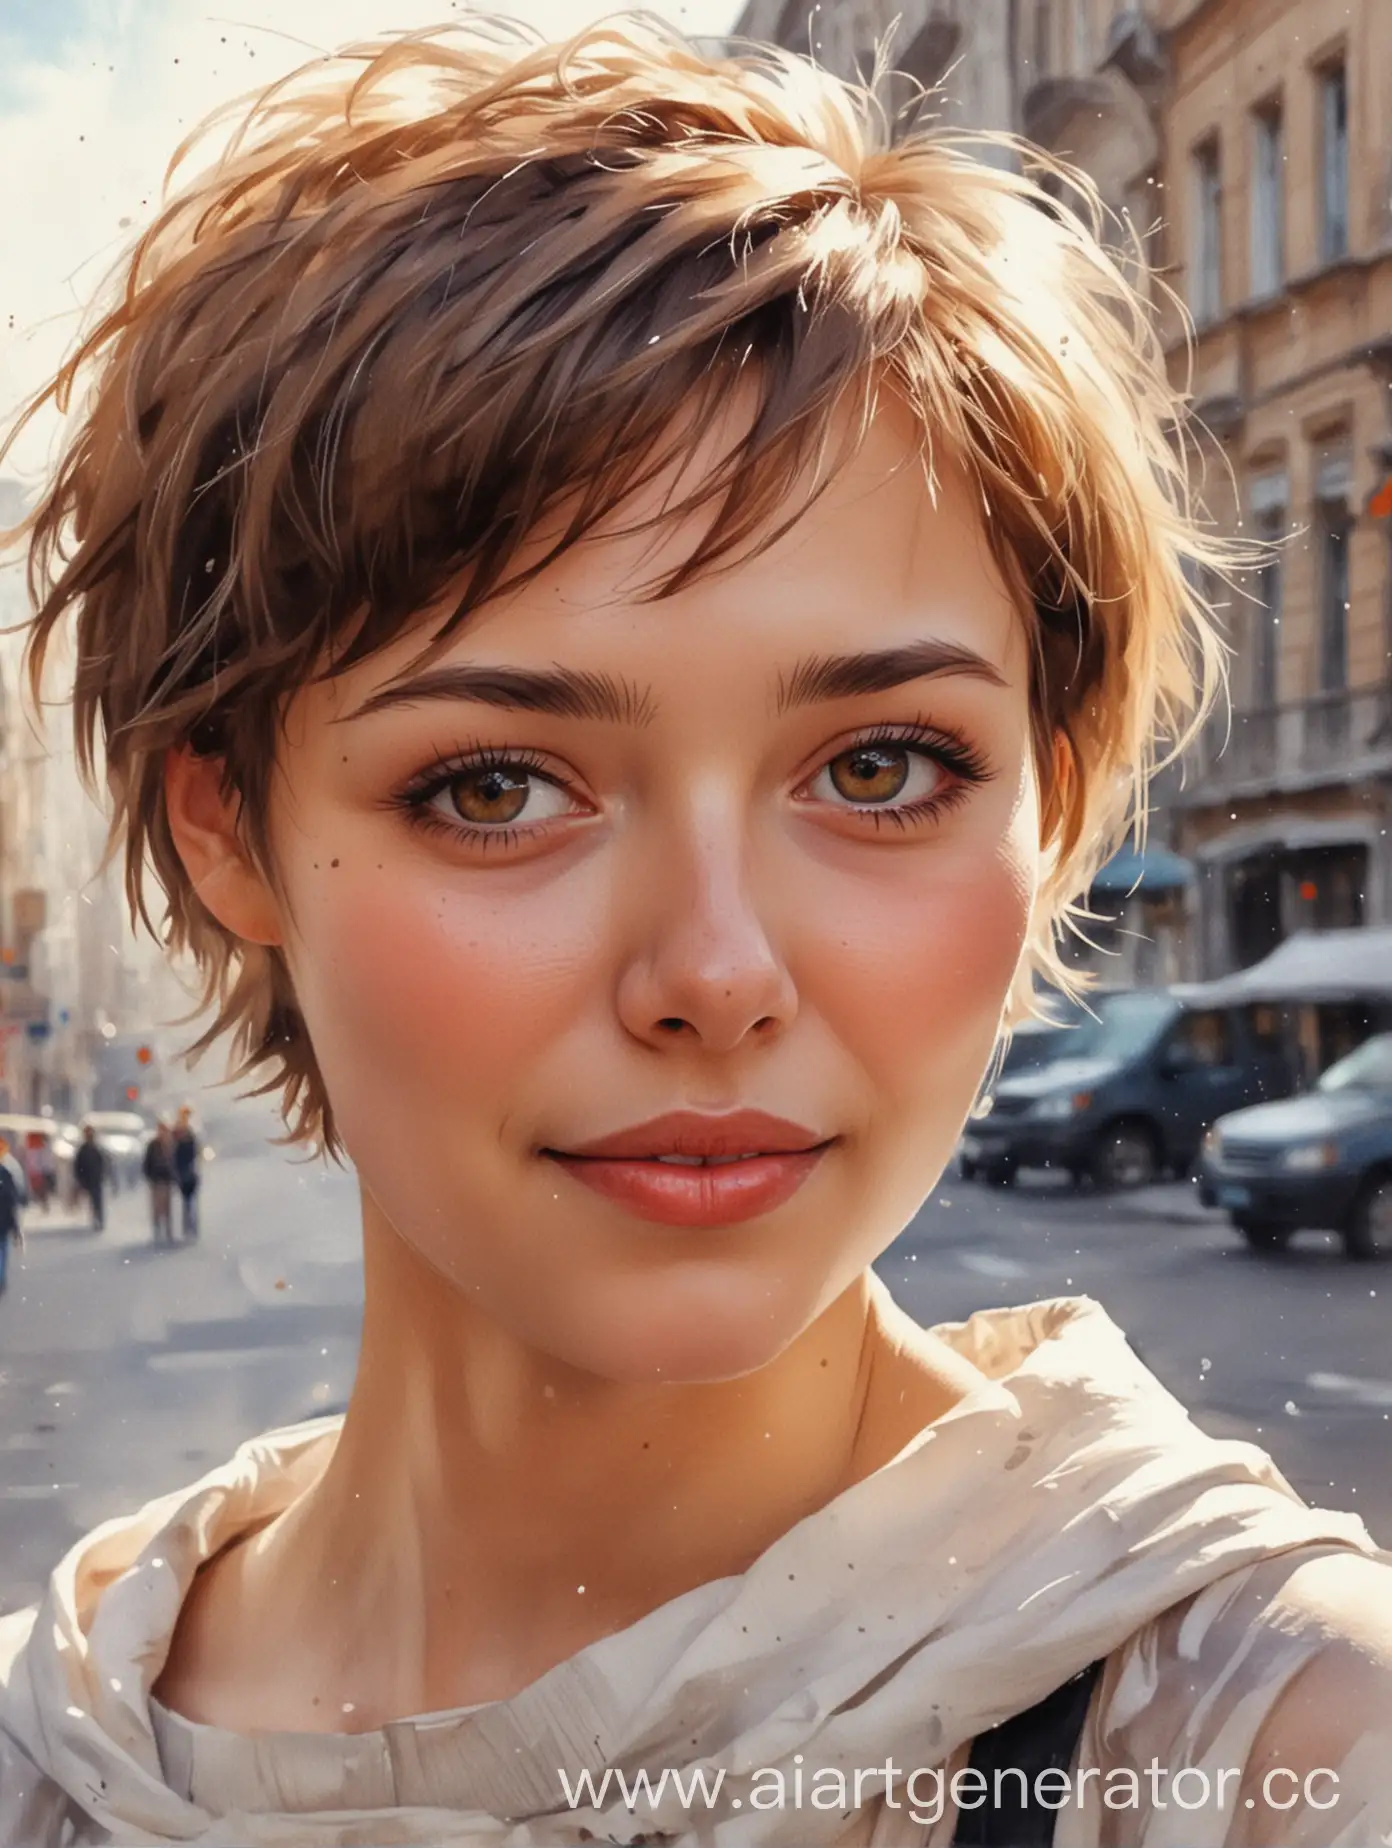 Cityscape-Portrait-Russian-Girl-with-Short-Hair-and-Brown-Eyes